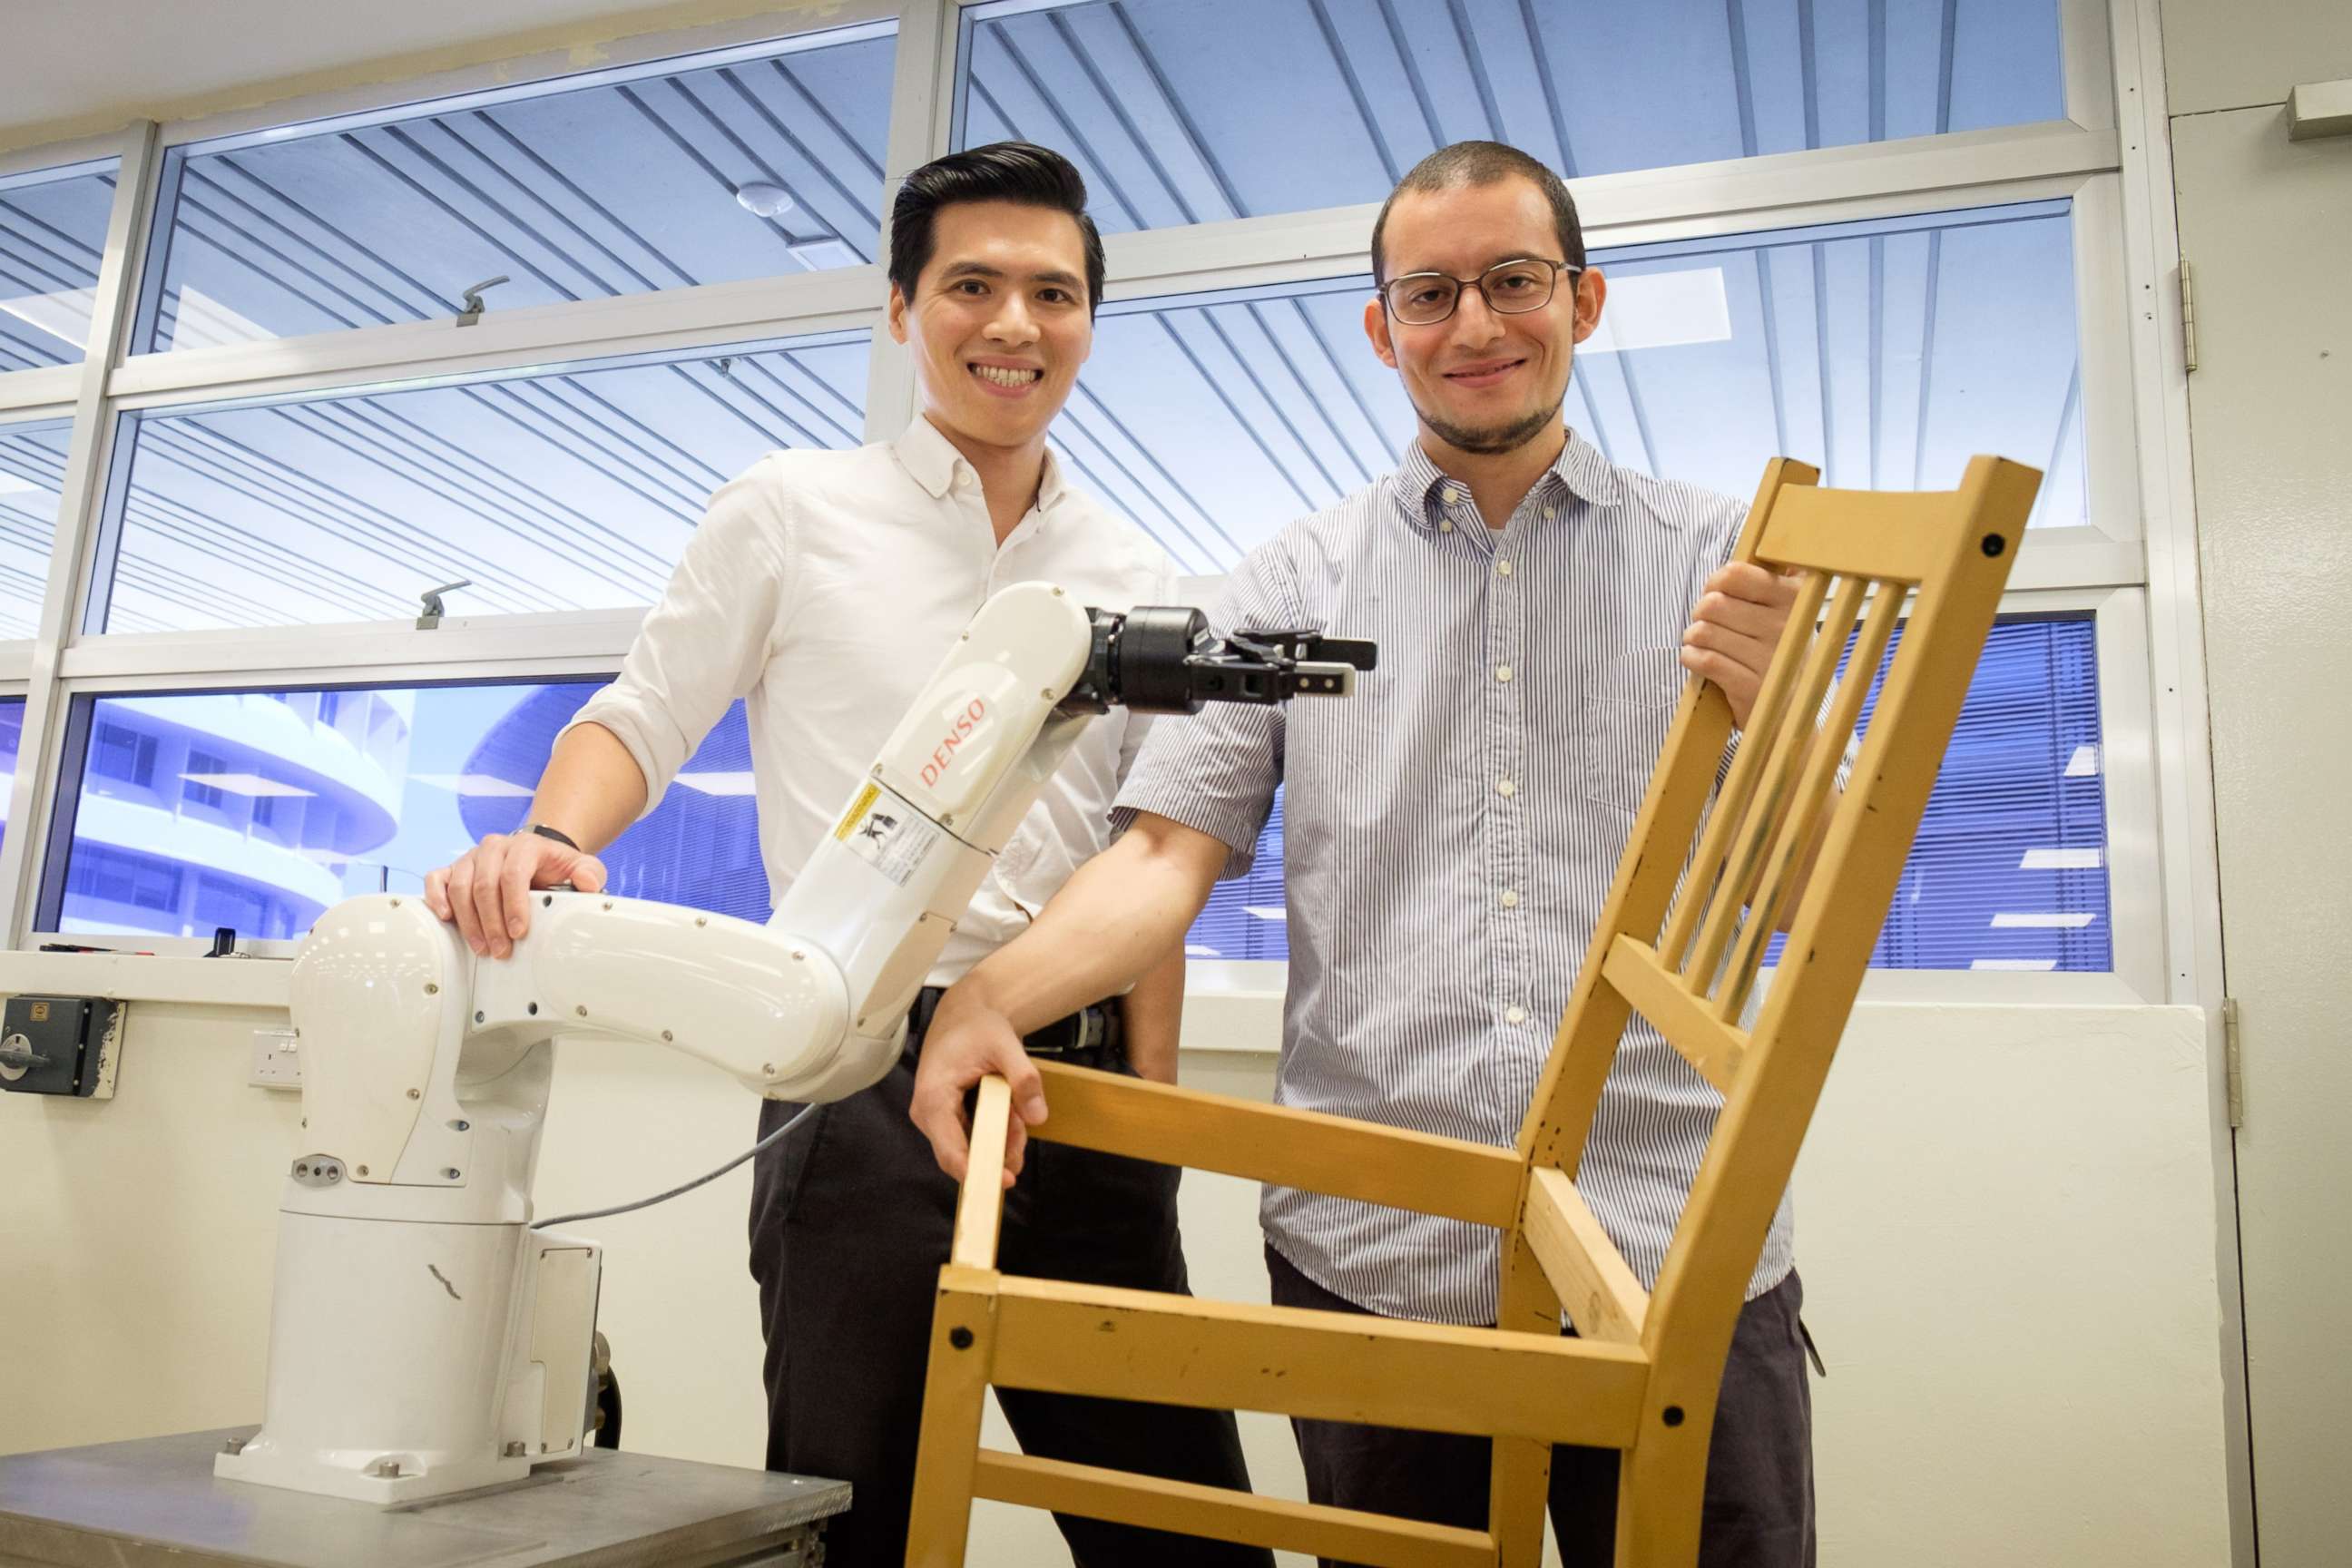 PHOTO: A photo released on April 19, 2018 by Nanyang Technological University shows assistant professor Pham Quang Cuong and research fellow Francisco Suarez-Ruiz posing with an autonomous robotic arm capable of assembling IKEA furniture, in Singapore.